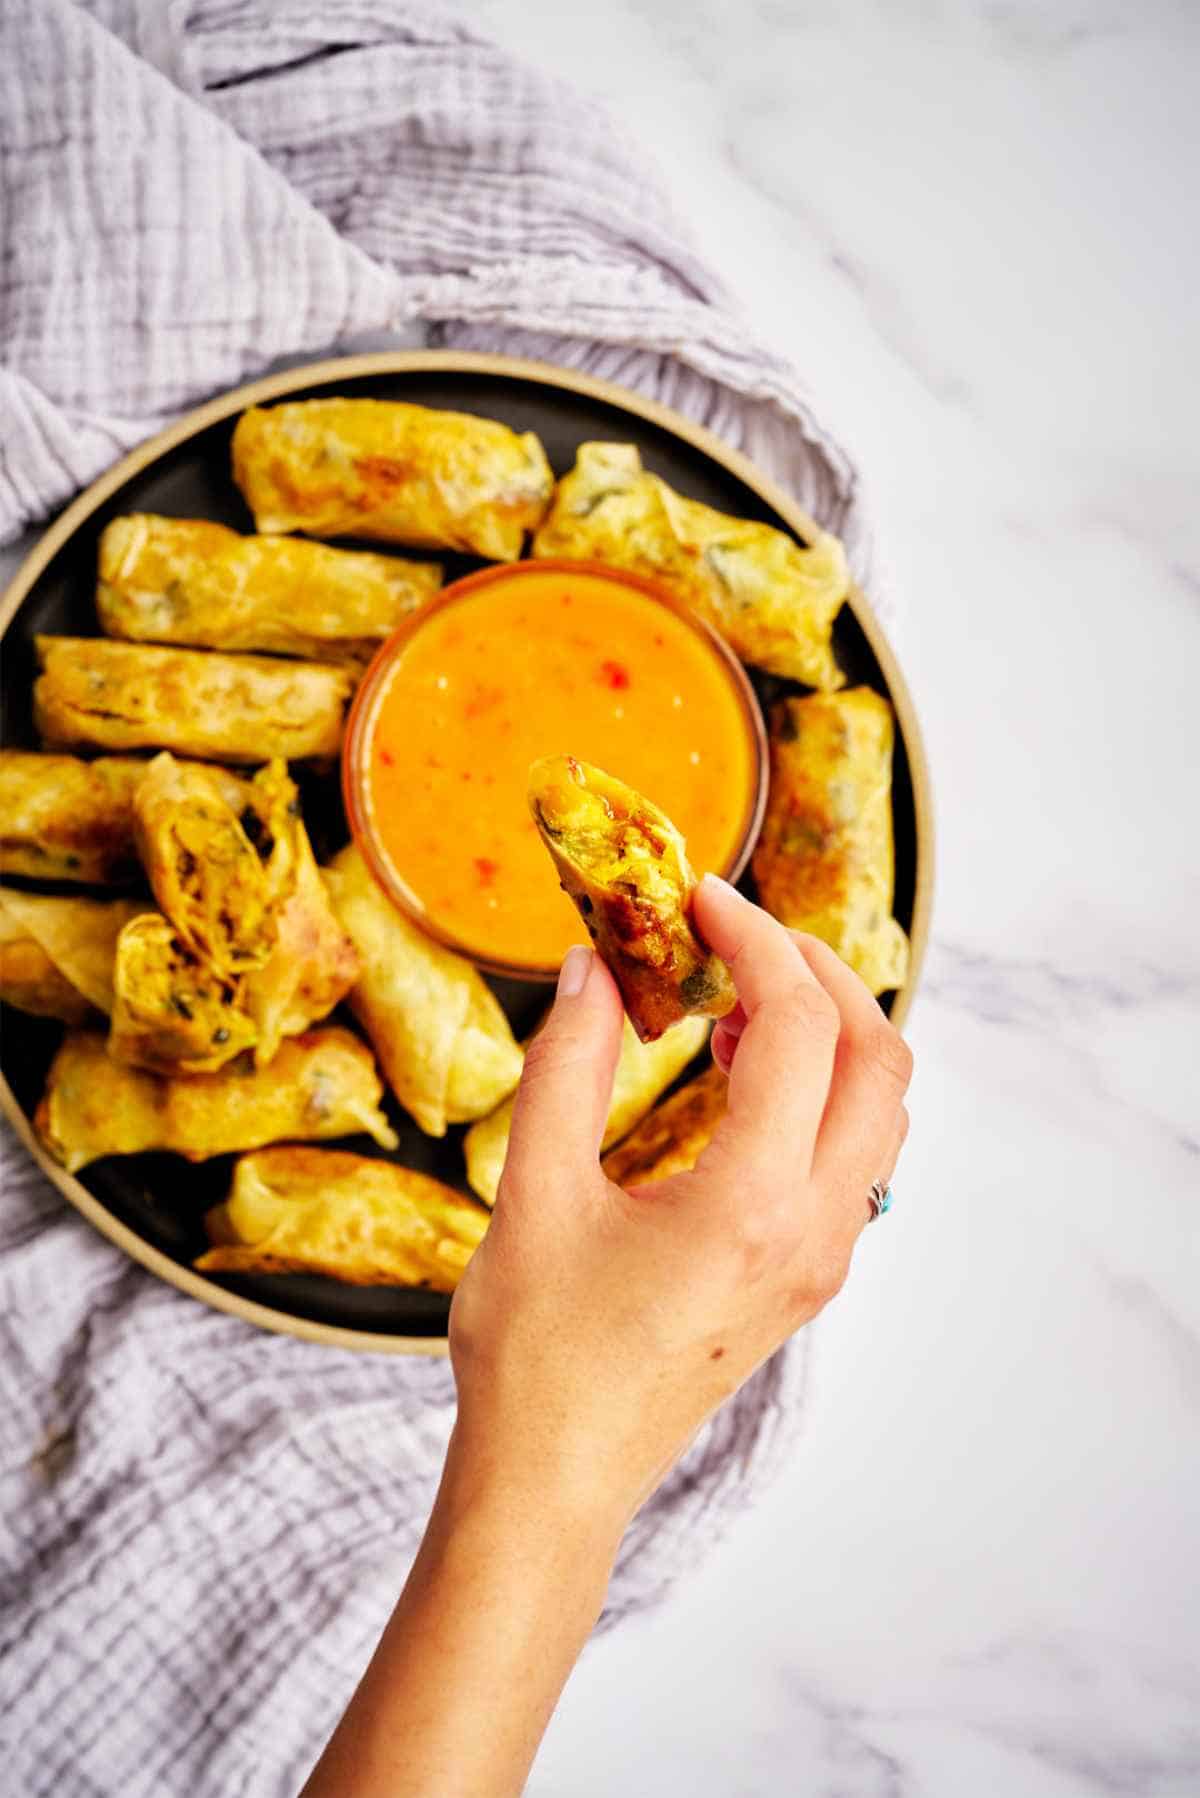 Dipping egg roll into orange sauce.